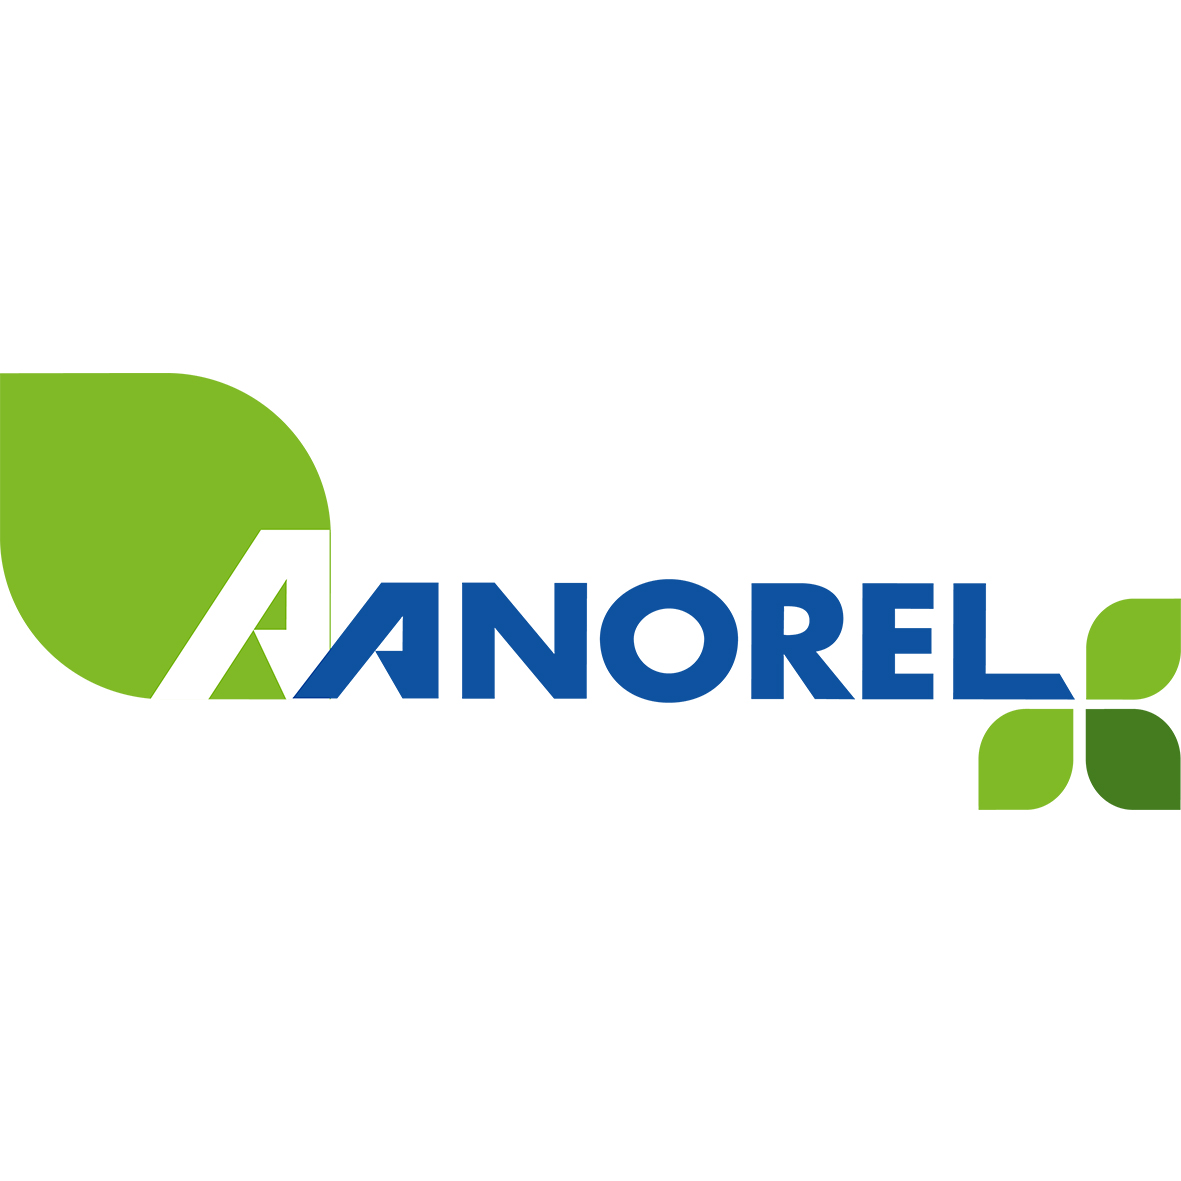 ANOREL